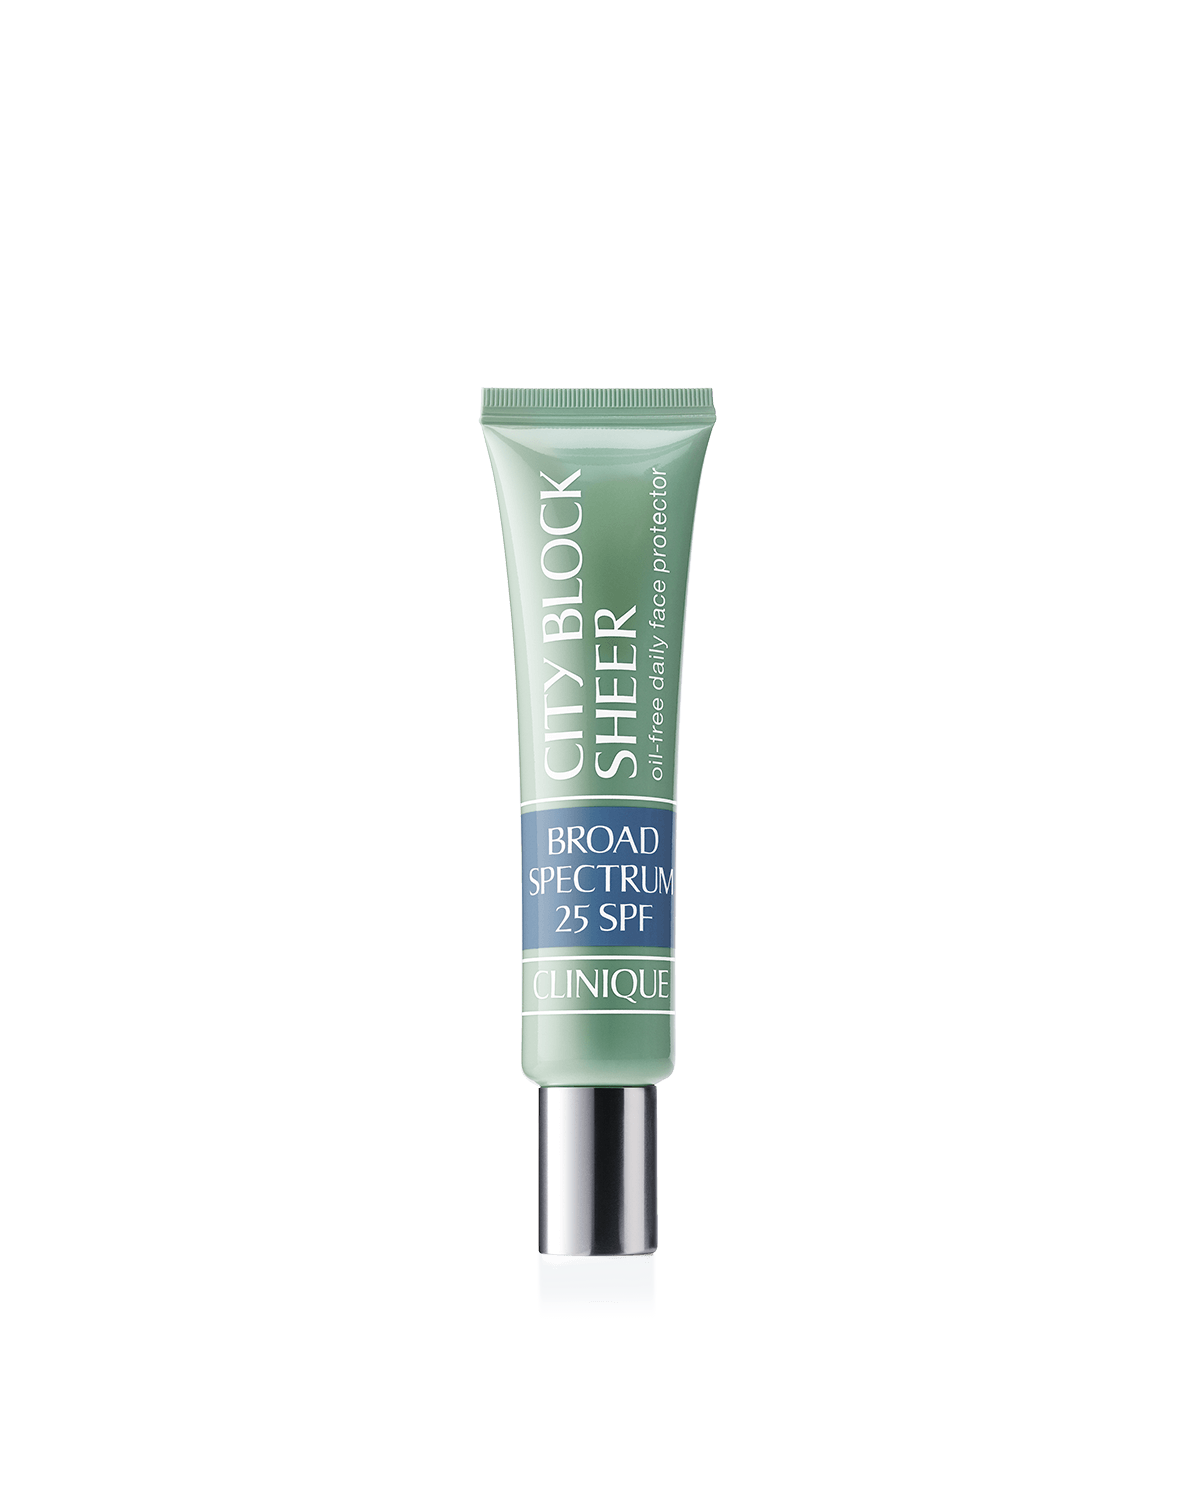 Jumping jack verhoging Aanpassen City Block™ Sheer Oil-Free Daily Face Protector Broad Spectrum SPF 25 |  Clinique